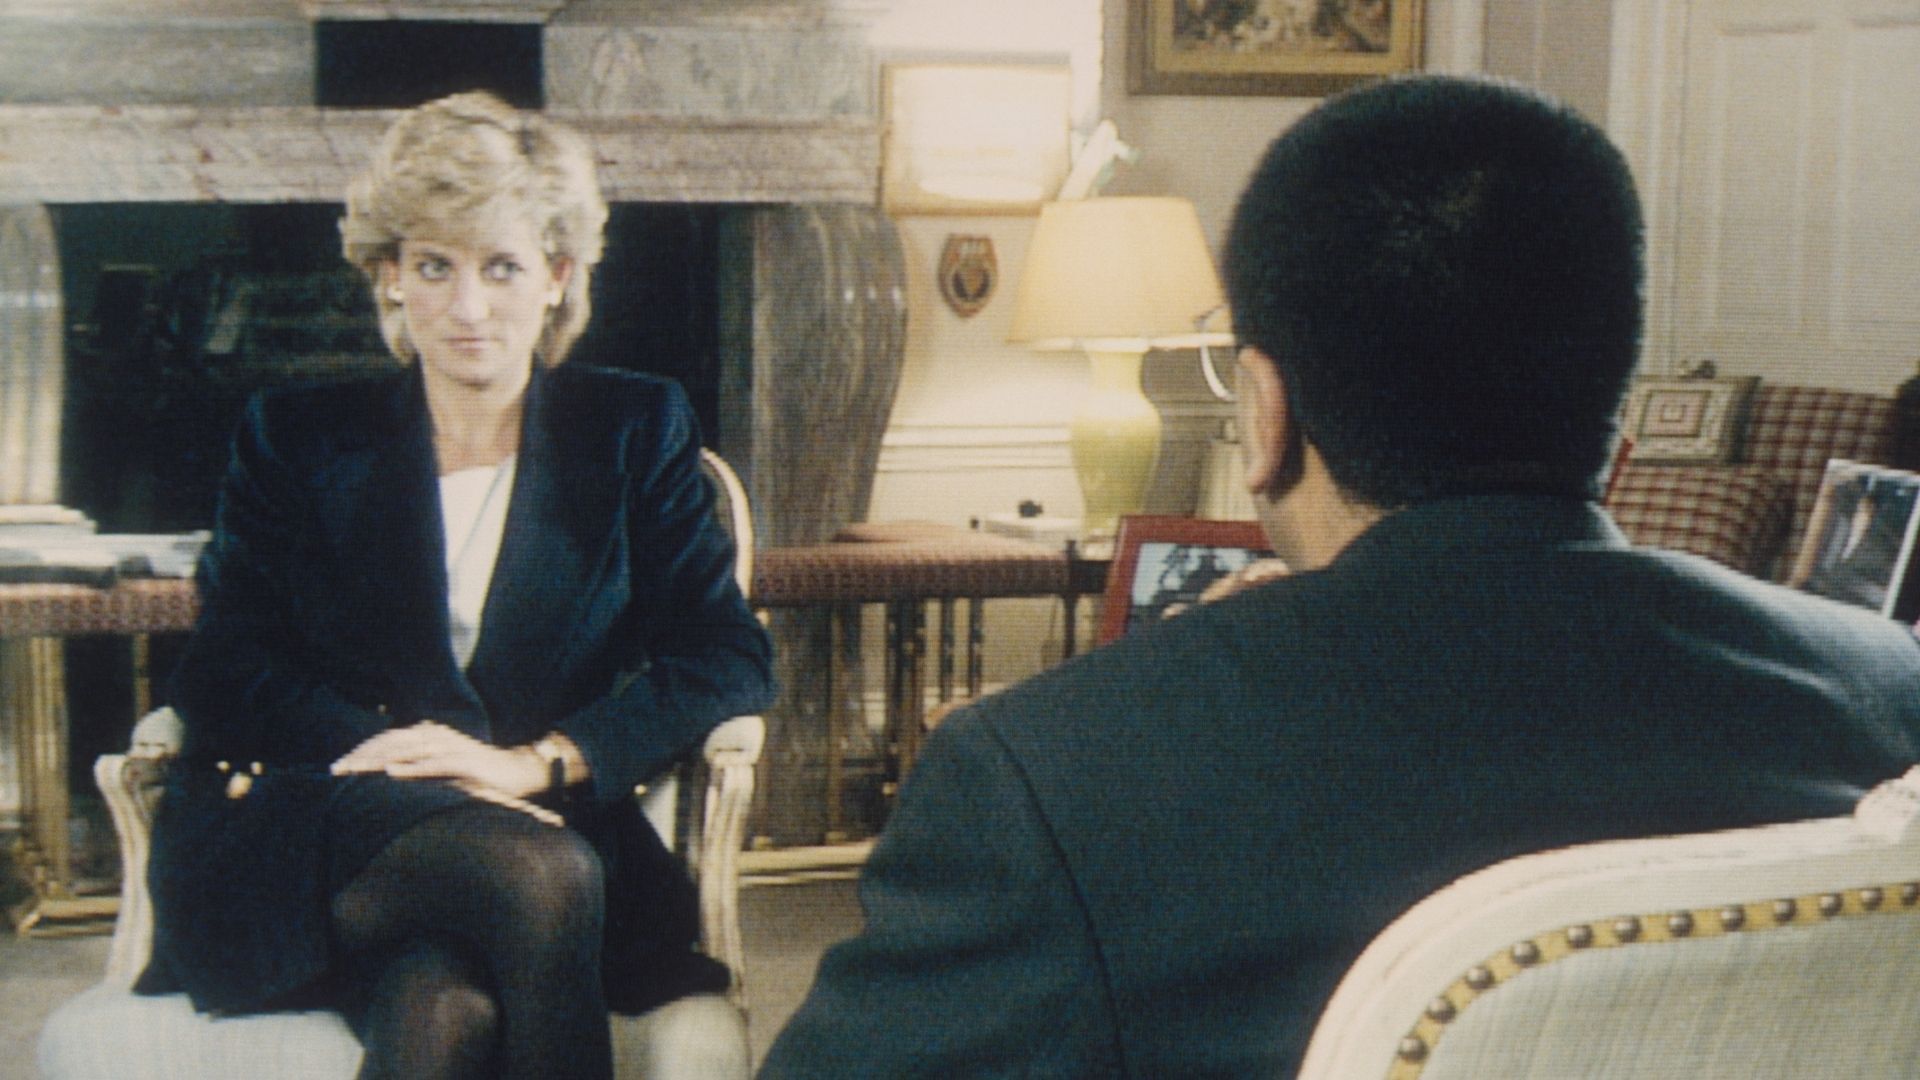 <p>                     This is not only one of Princess Diana's most memorable moments but also one of broadcasting history's too. Titled An Interview with HRH The Princess of Wales, it was broadcast on the 20th of November 1995 on BBC1. Diana spoke about several hard-hitting topics, from the Royal Family's distaste for her to the struggles she'd faced after having her babies. The controversial interview was met with divisive opinions, with many arguing that Diana had been manipulated and tricked into revealing private information. However many of Princess Diana's most iconic quotes came out of this interview as she'd never been so honest about her life as a royal before.                   </p>